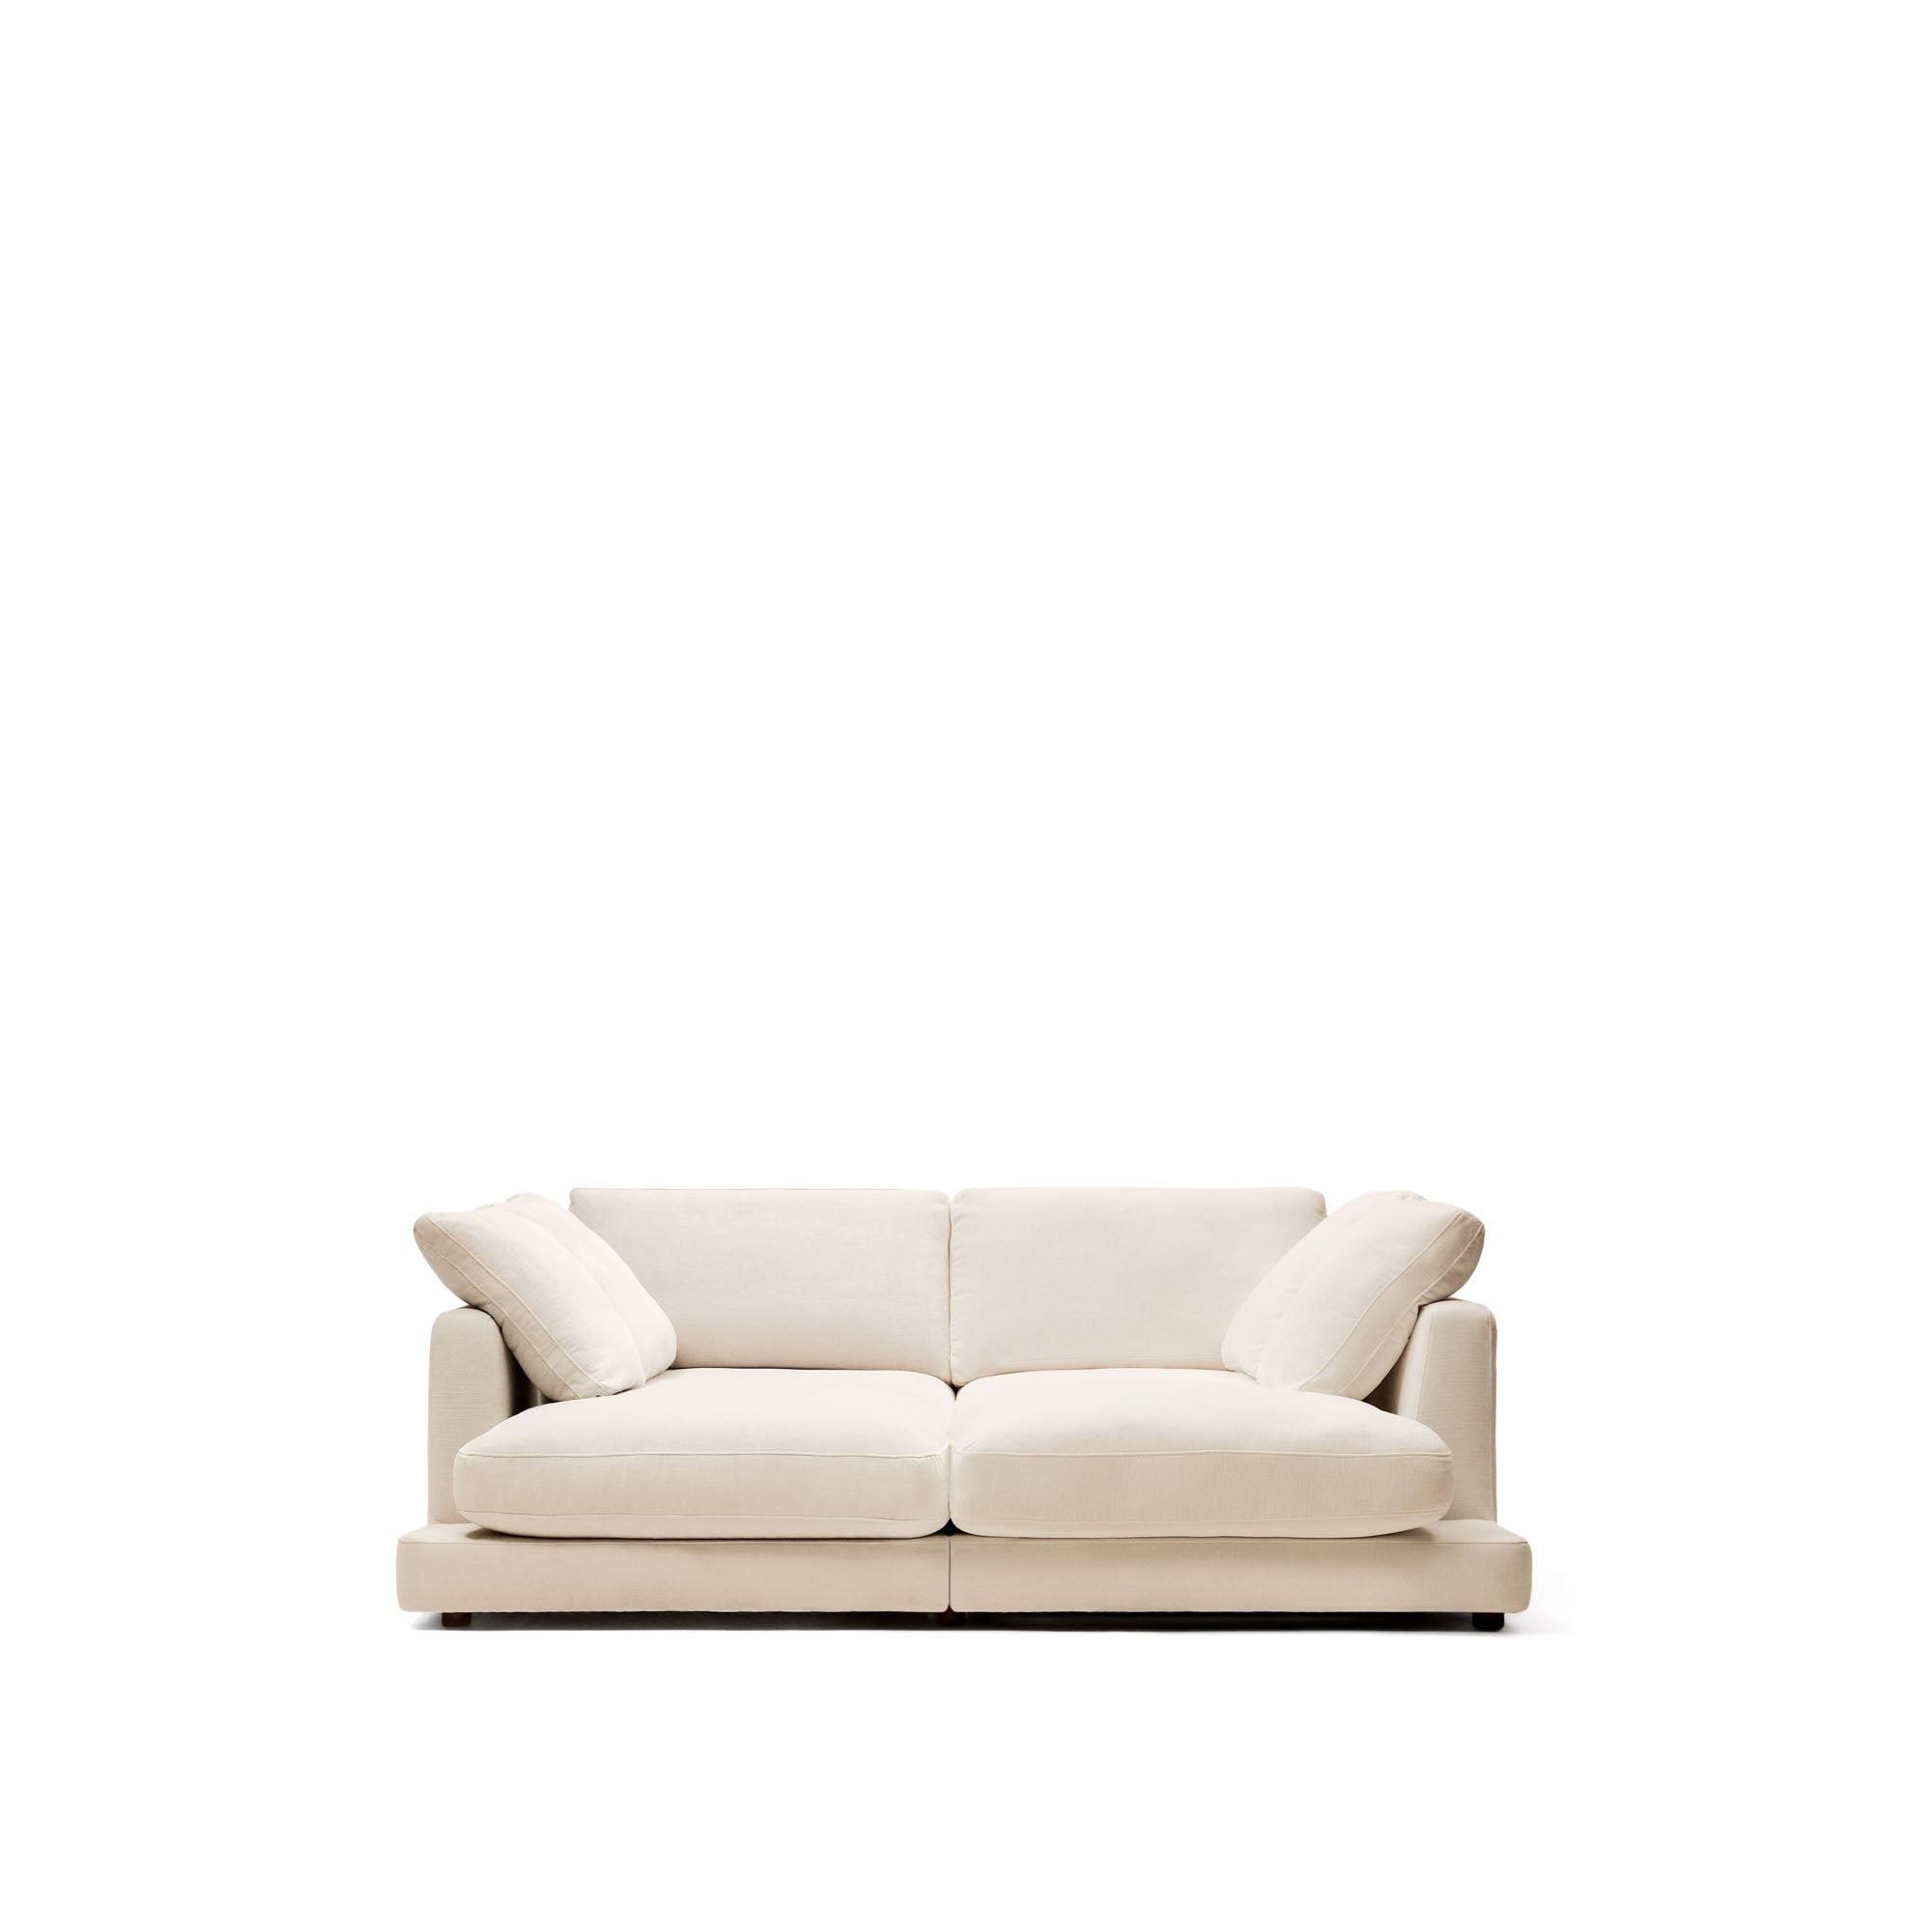 Gala 3 seater sofa with double chaise longue in beige, 210 cm